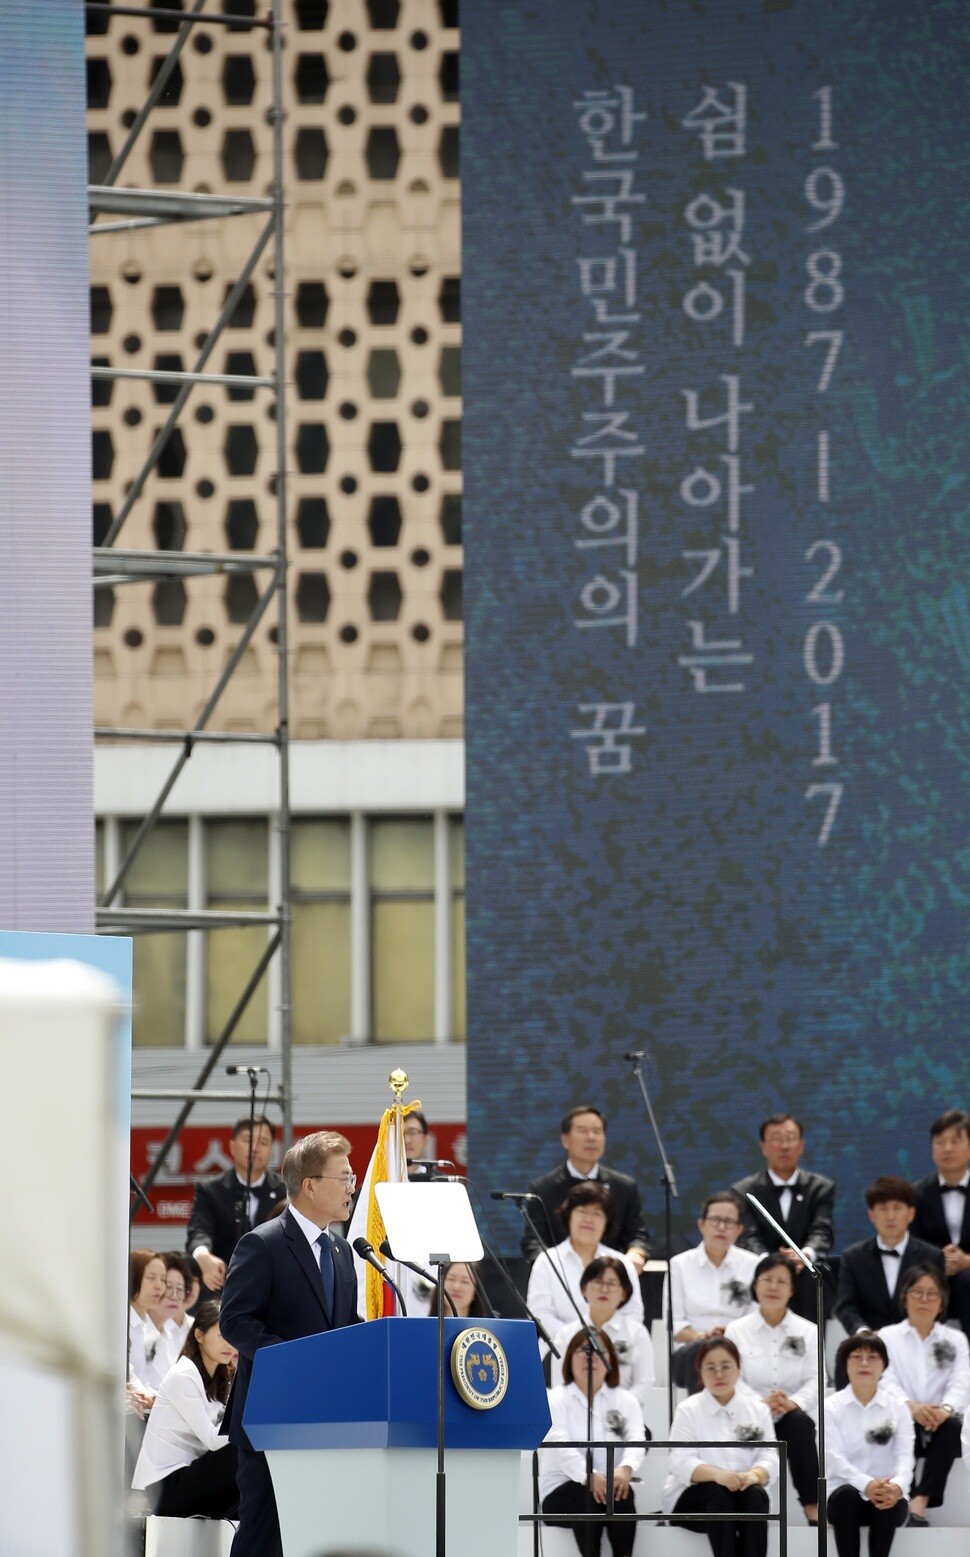 South Korean President Moon Jae-in makes a speech during a ceremony to mark the 30th anniversary of the June 10 Democratization Movement at the Seoul Plaza on June 10